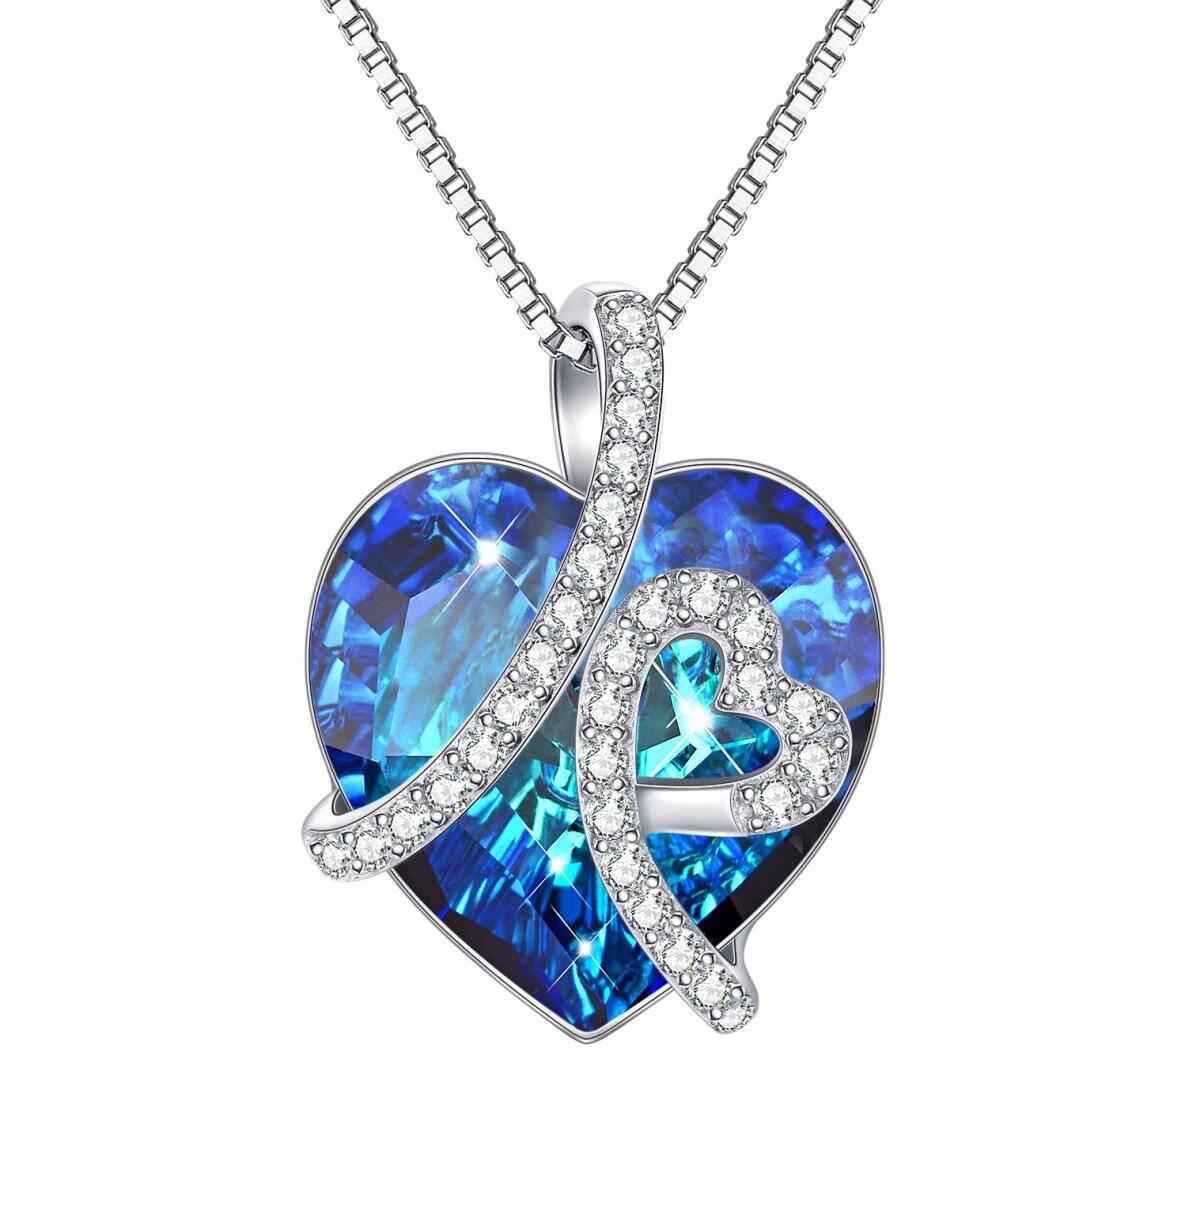 Sterling Silver Heart Shaped Blue Crystal Heart Pendant Necklace with Box Chain-1